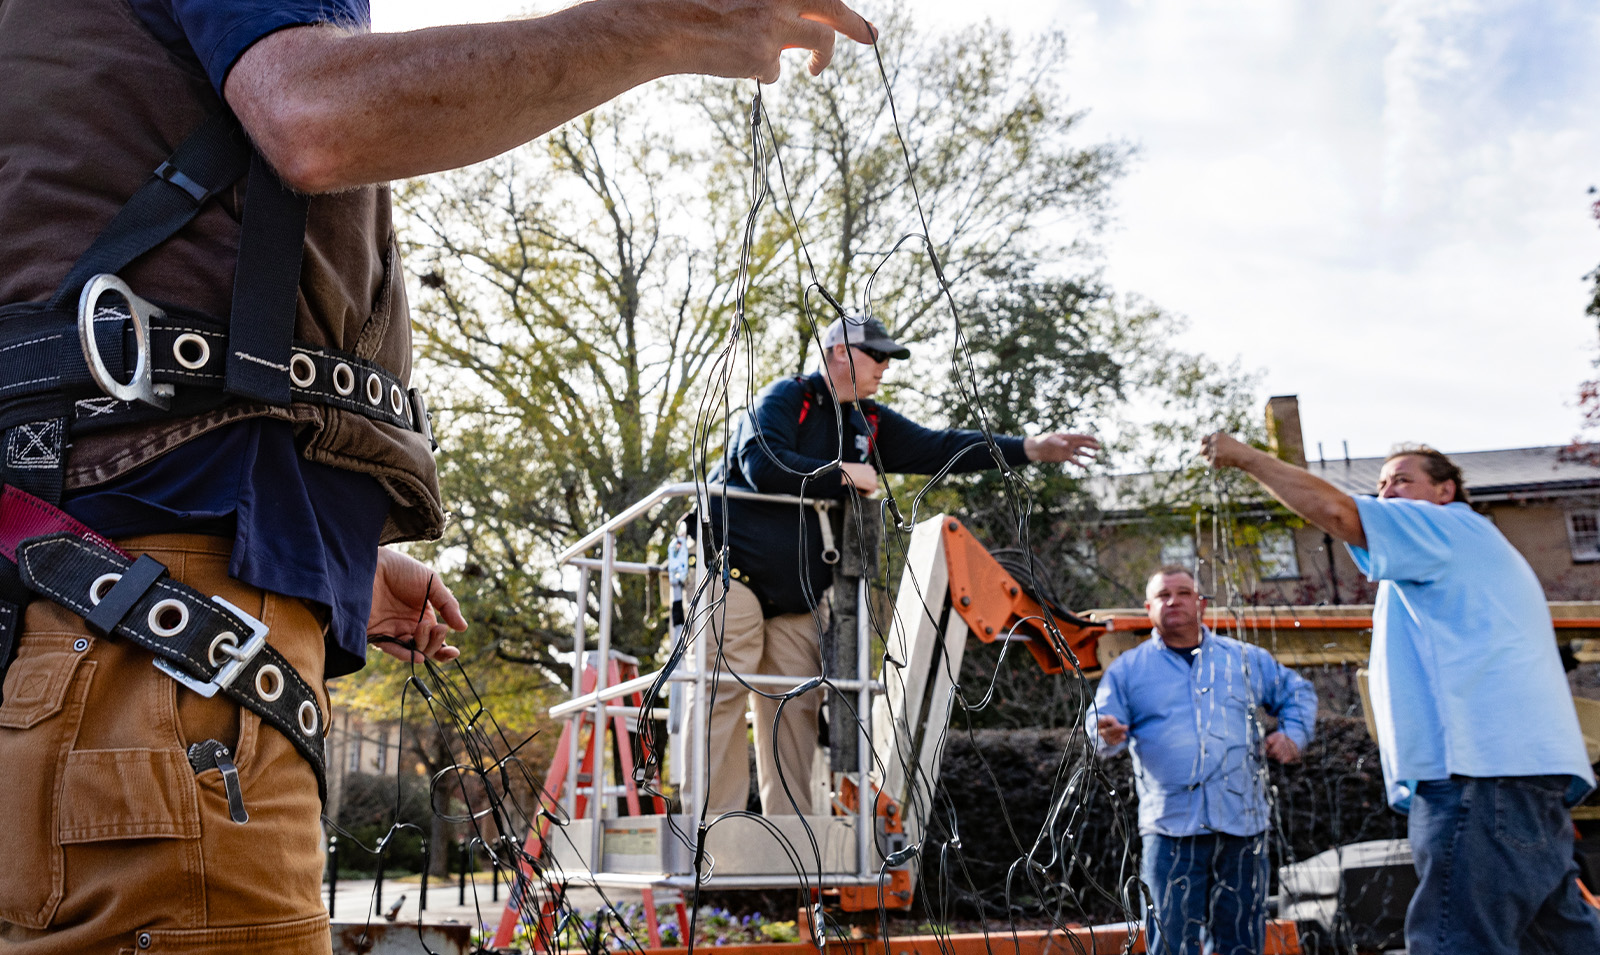 Workers holding a string of hoilday lights as they prepare to place them on the Old Well on the campus of UNC-Chapel Hill.